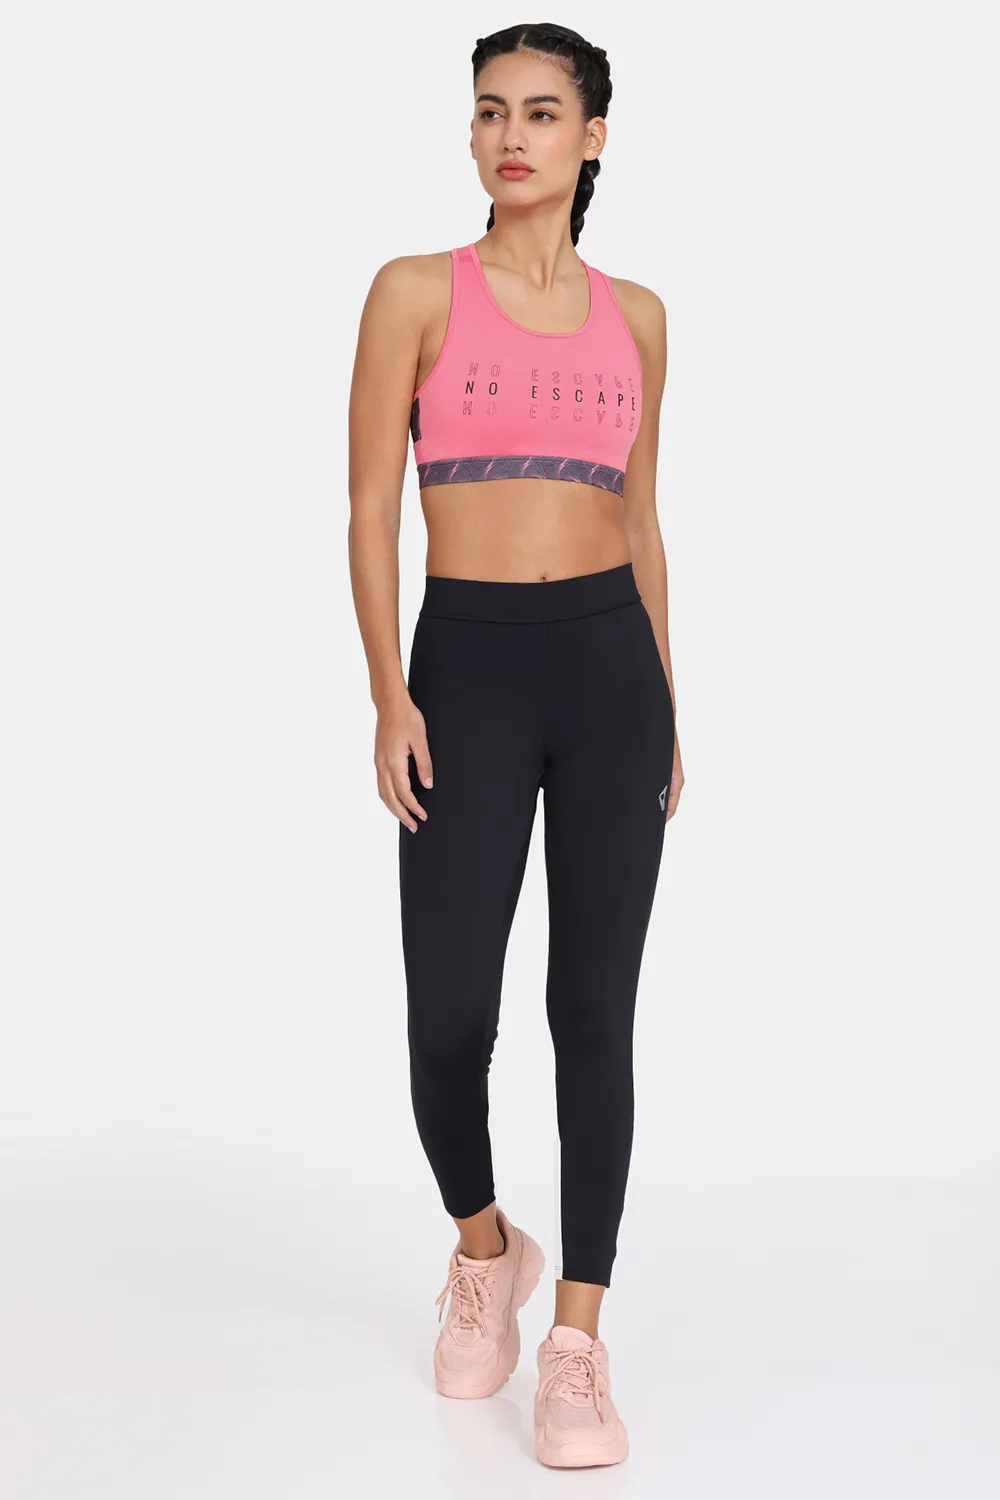 WornOnTV: Candiance's Versace leggings and sports bra on The Real  Housewives Ultimate Girls Trip | Clothes and Wardrobe from TV